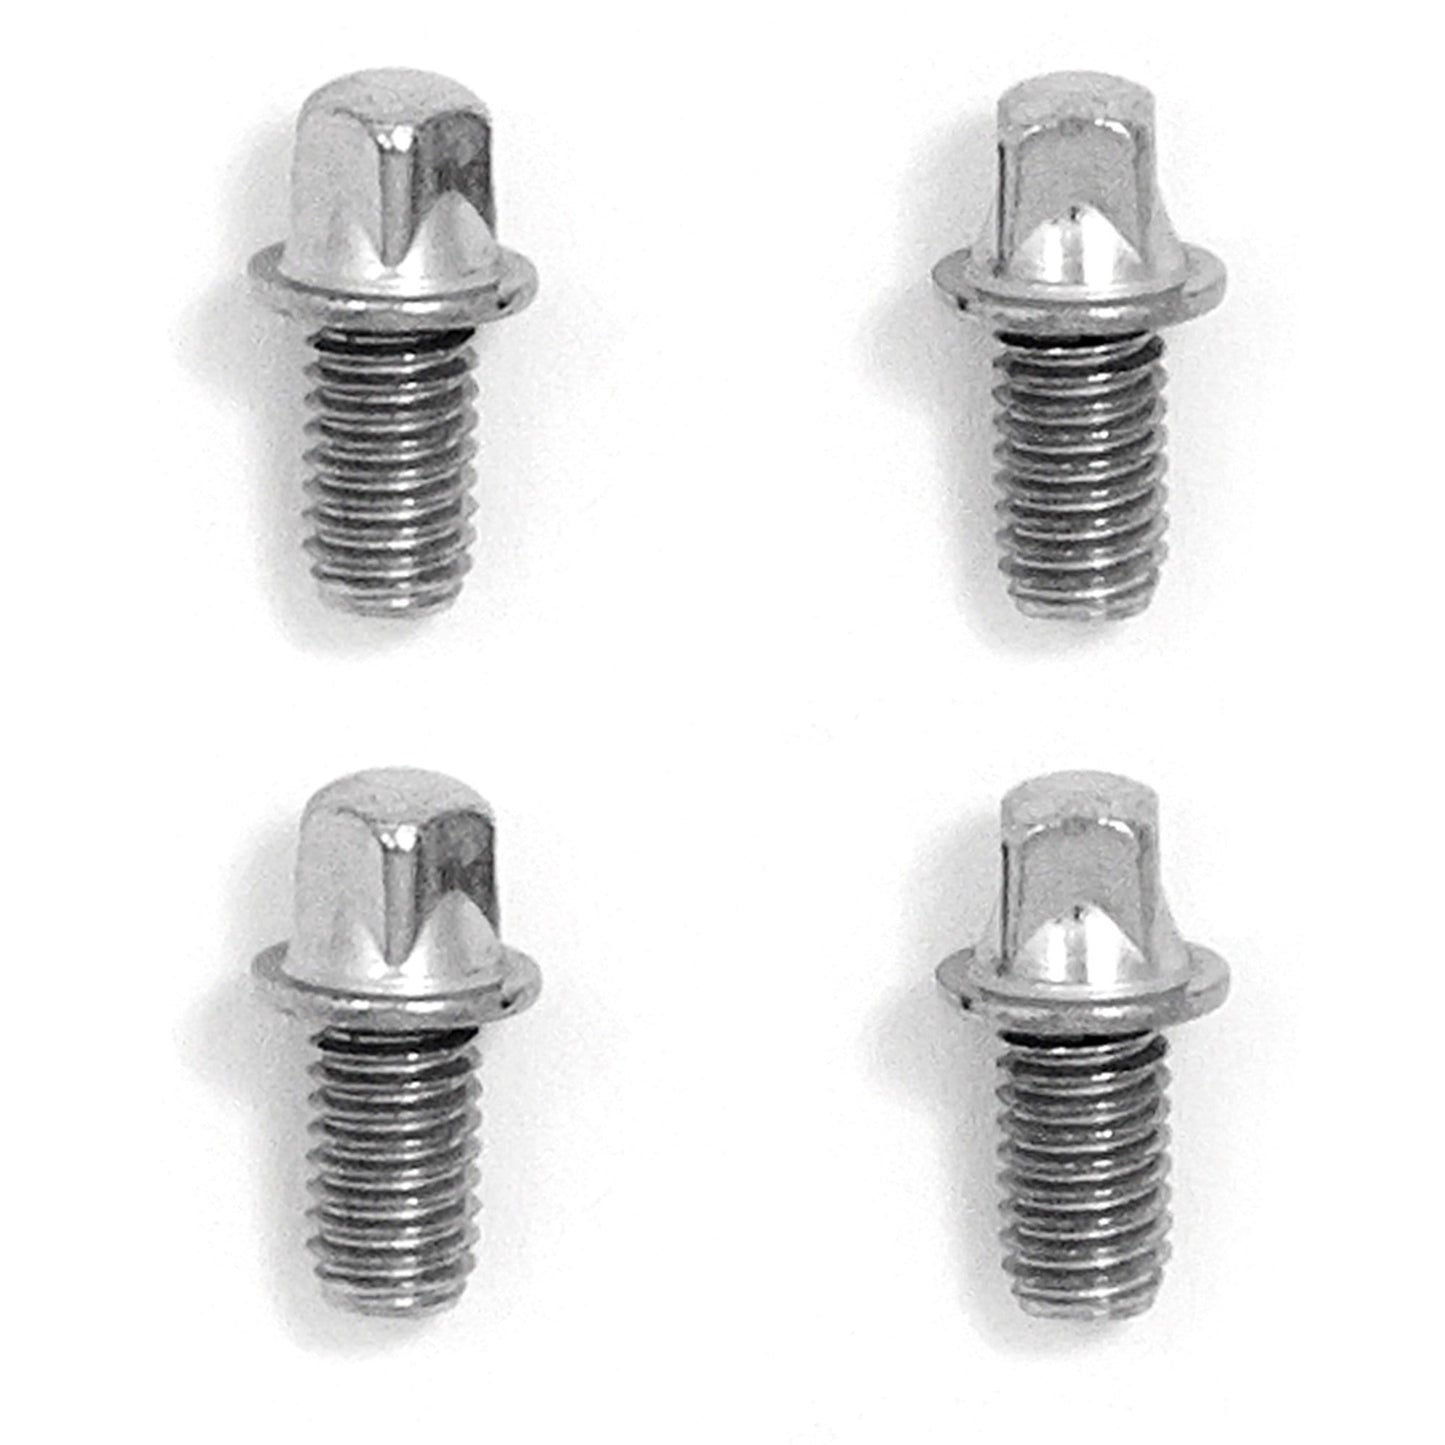 Gibraltar 6mm Key Screw for U-Joint (24 Pack Bundle) Drums and Percussion / Parts and Accessories / Drum Parts